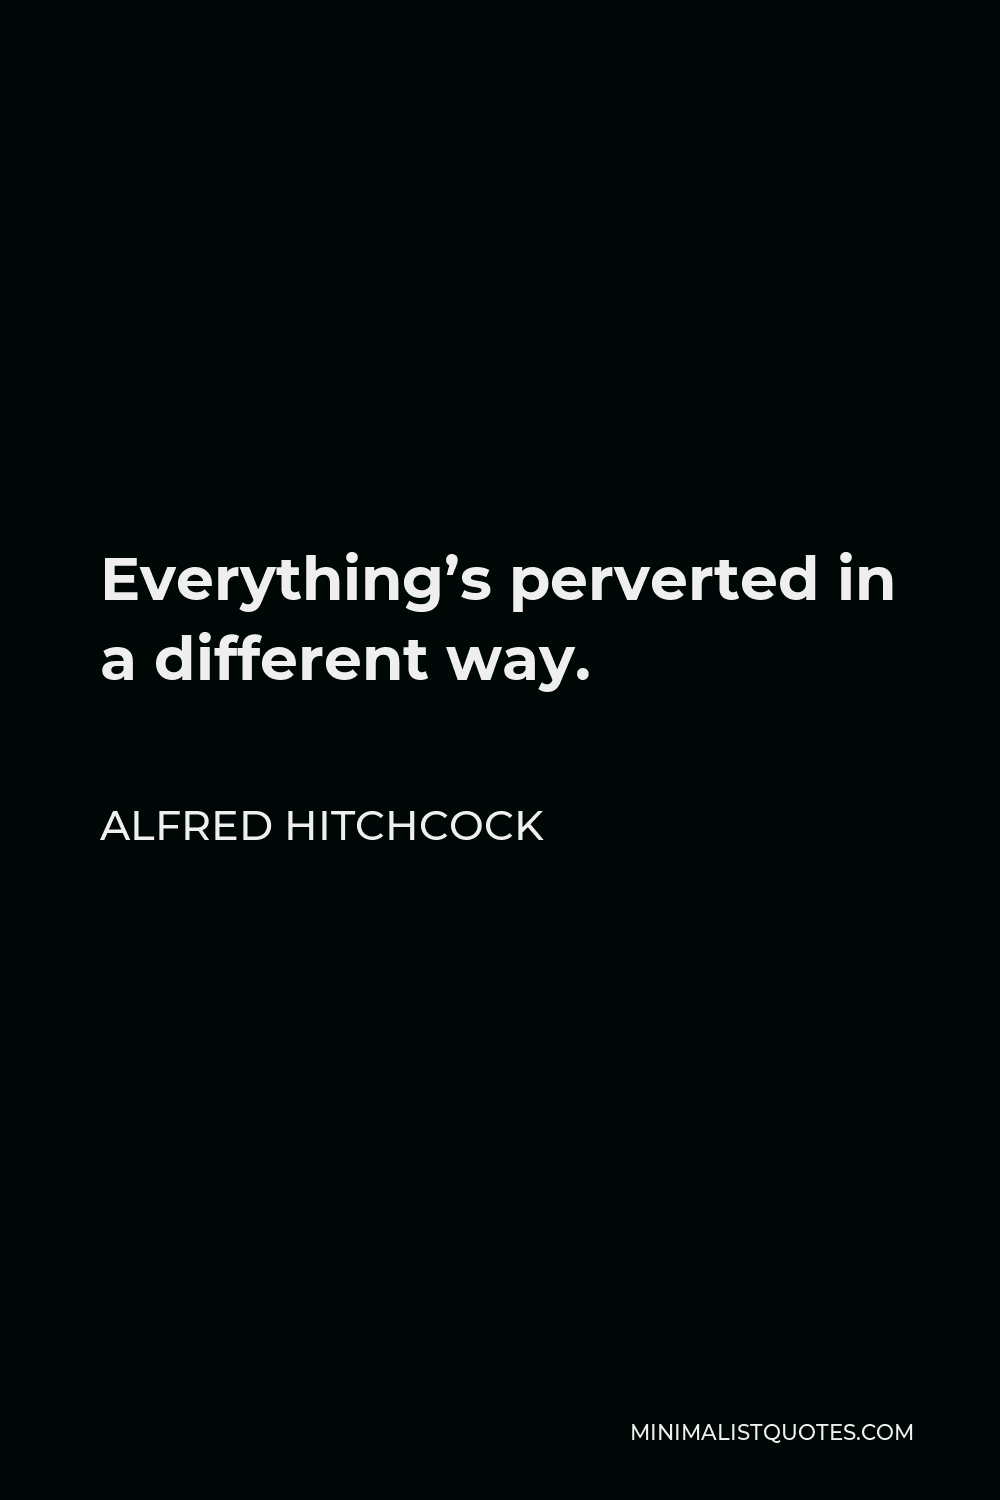 Alfred Hitchcock Quote: Disney has the best casting. If he doesn't like ...